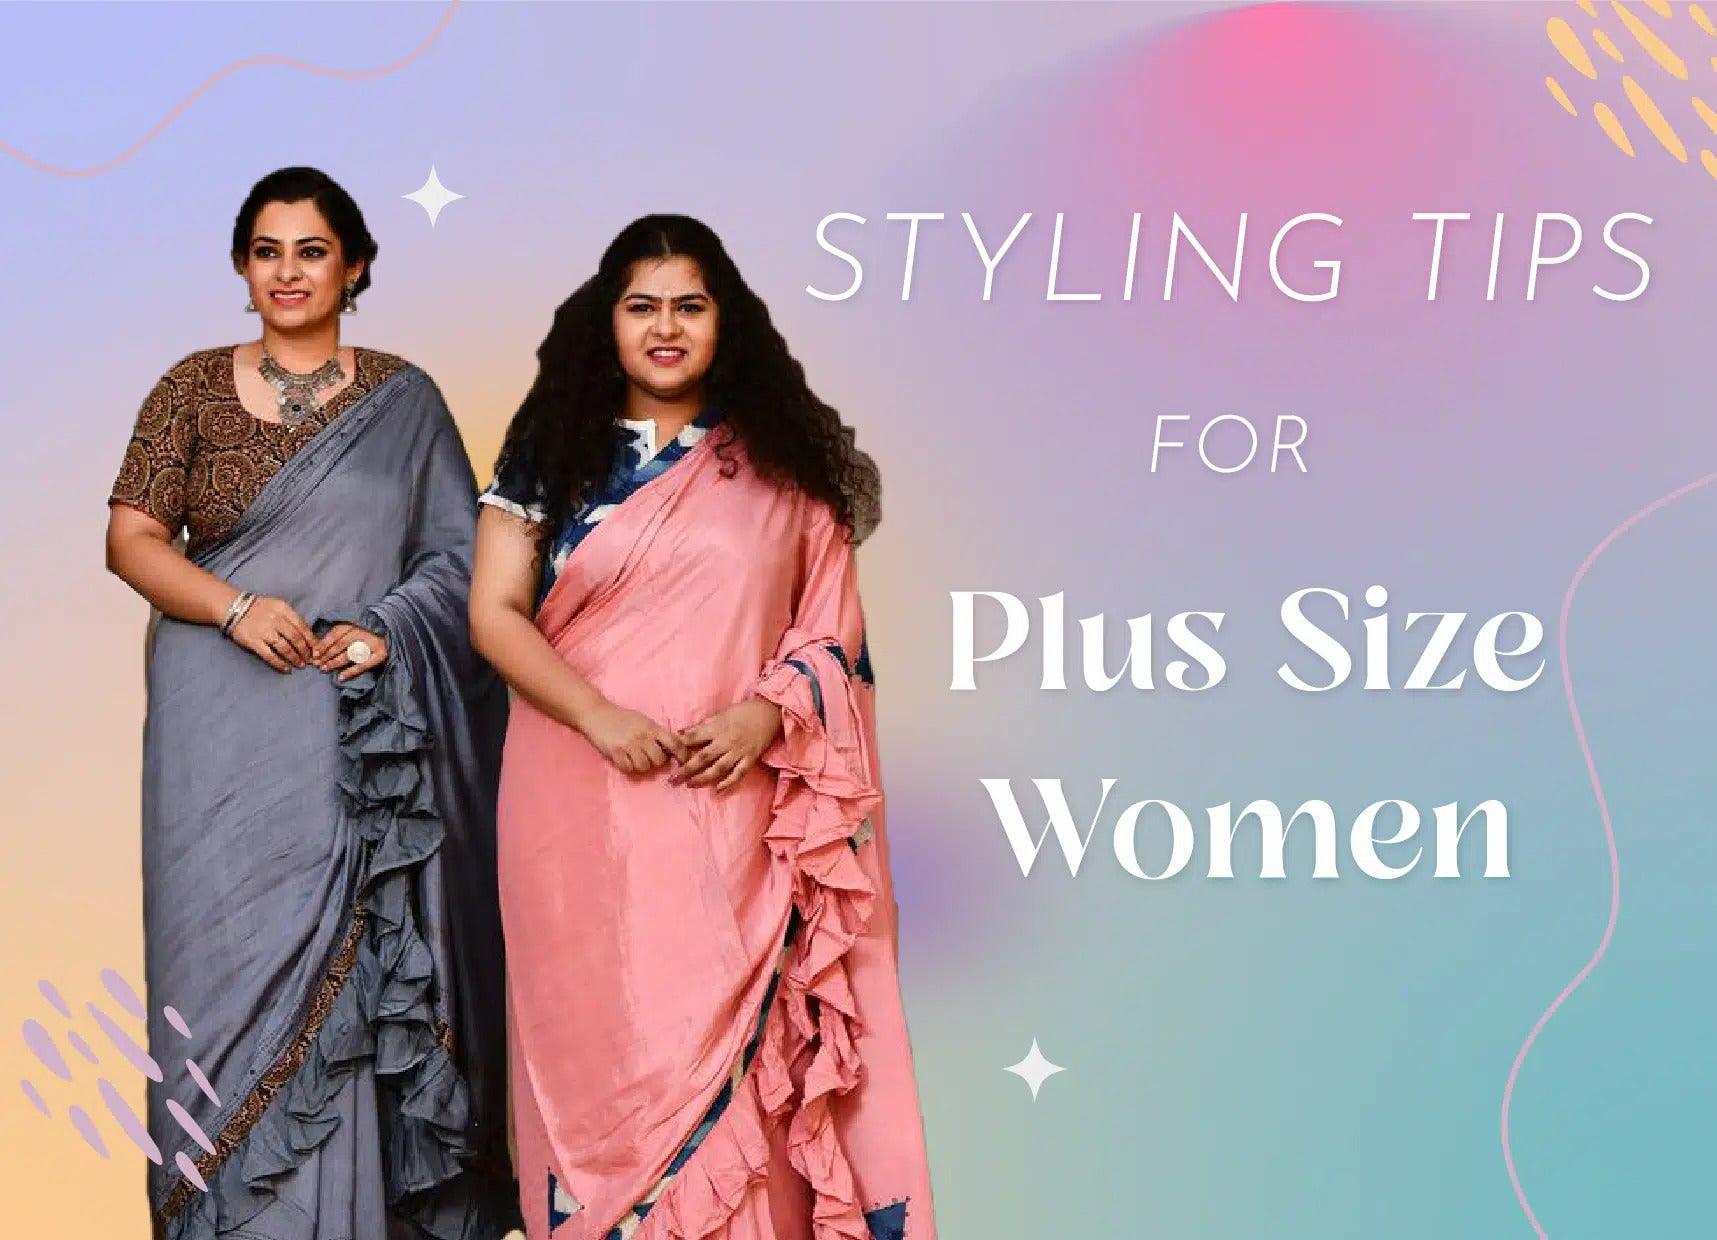 How To Choose Sari According To Your Body Type?? - Beauty